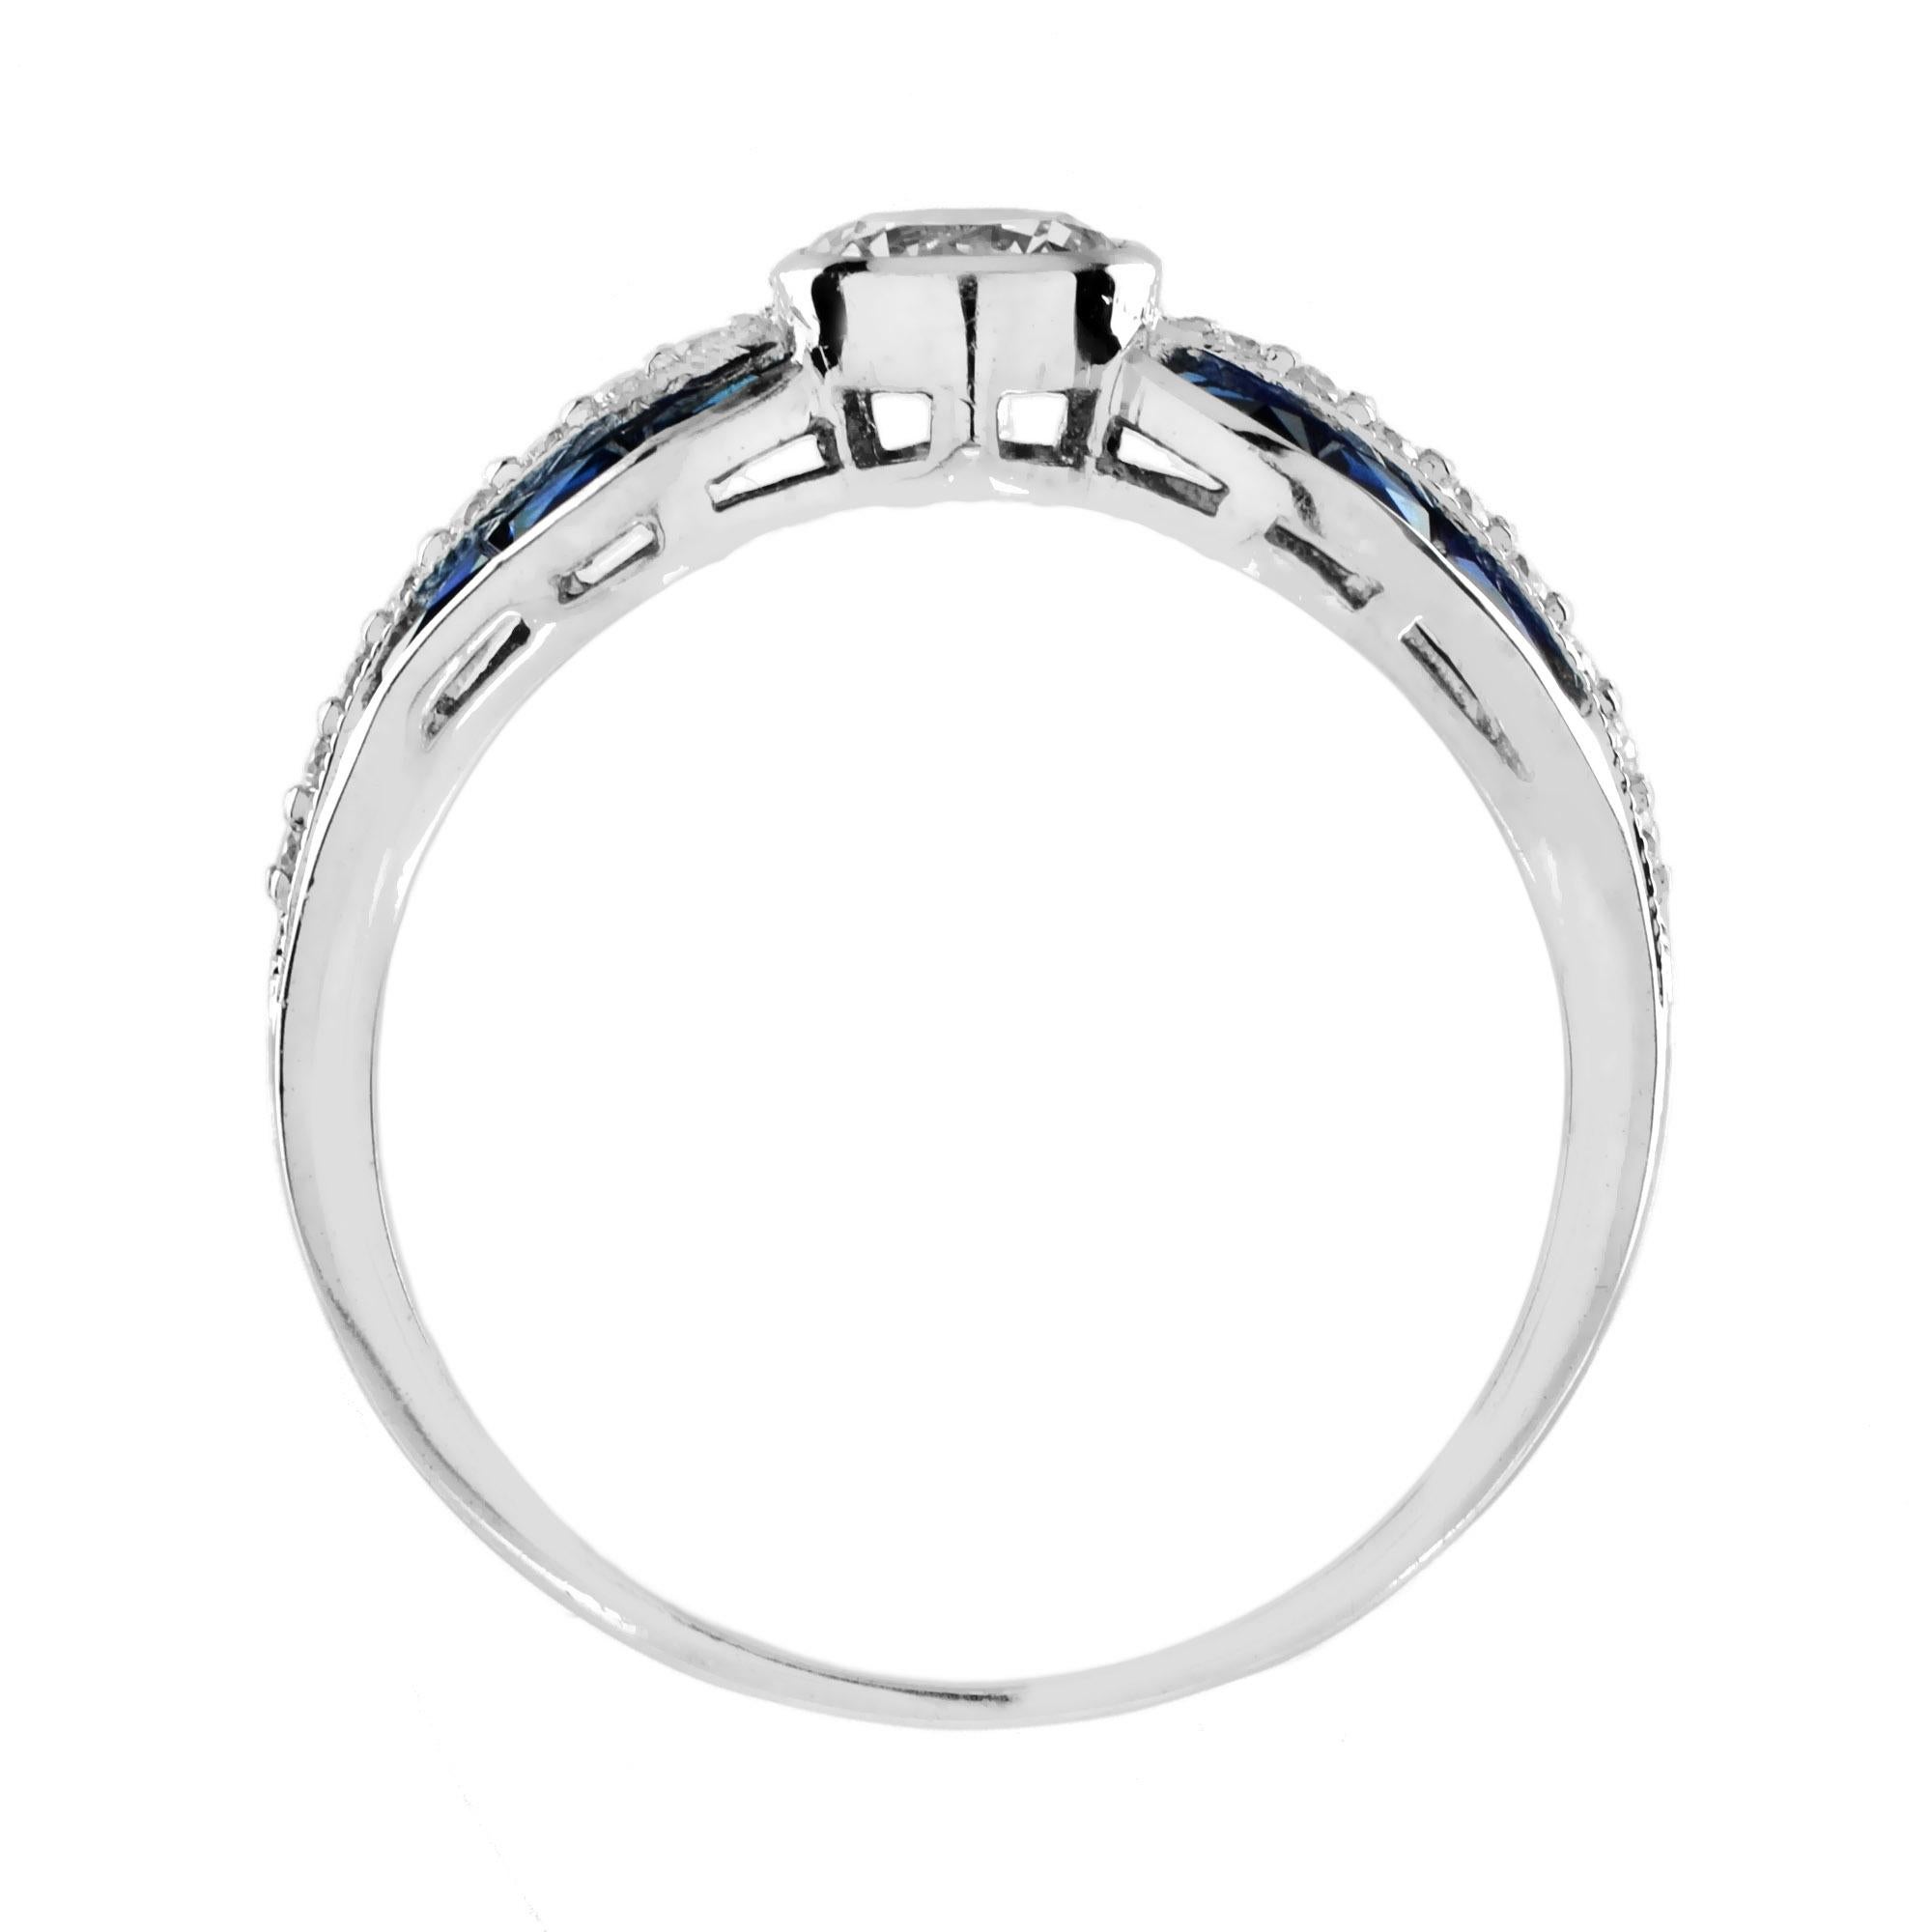 For Sale:  Diamond and Sapphire Art Deco Style Solitaire Ring in 18K White Gold 6